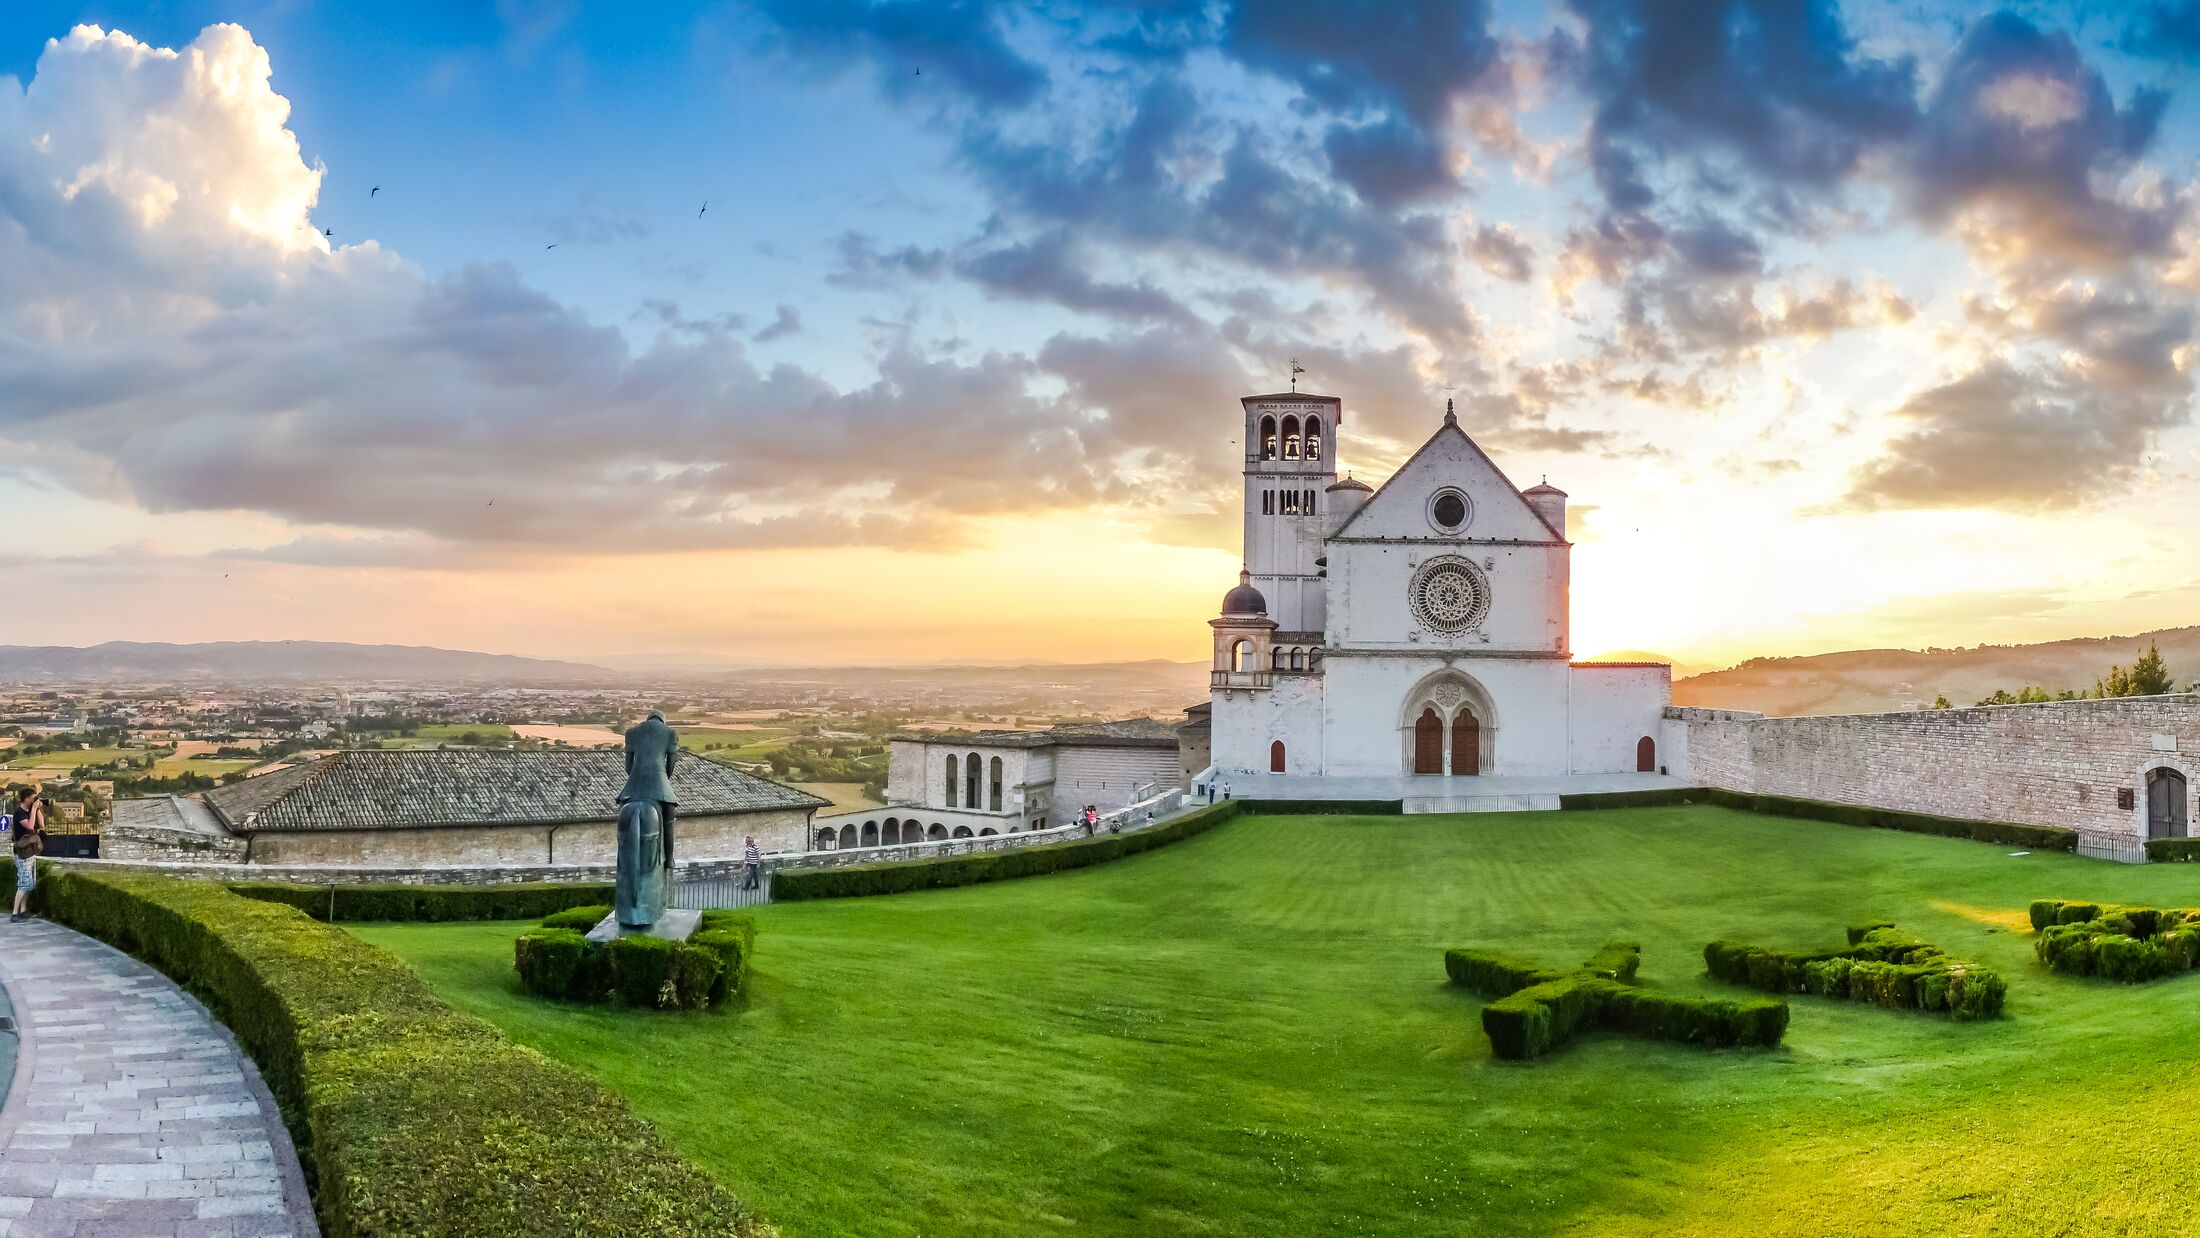 Famous Basilica of St. Francis of Assisi (Basilica Papale di San Francesco) at sunset in Assisi, Umbria, Italy